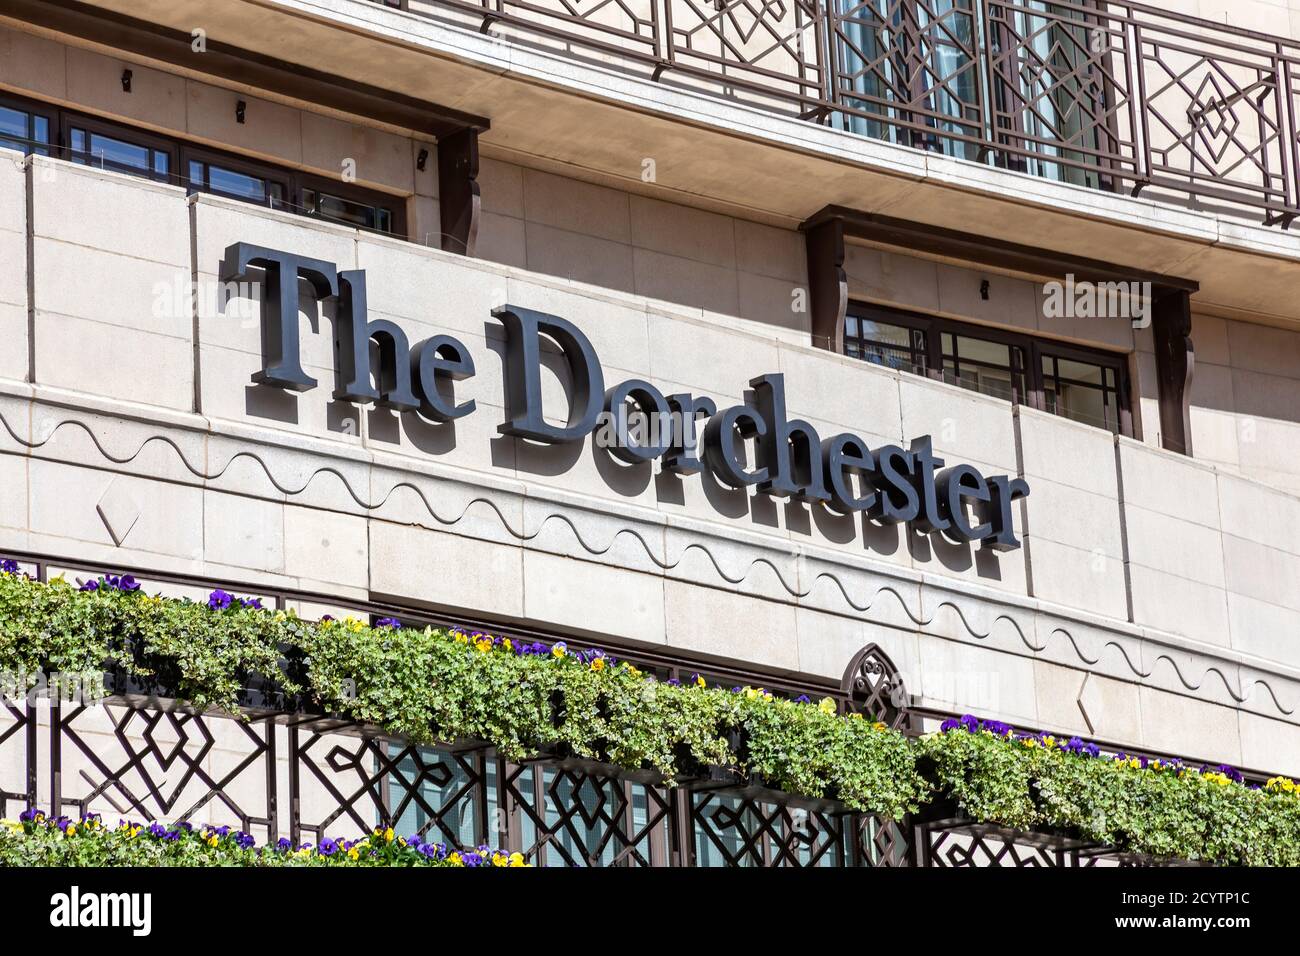 London, UK, April 1, 2012 : The Dorchester Hotel advertising logo sign outside its hotel in Park Lane Mayfair Hyde Park which is a popular travel dest Stock Photo